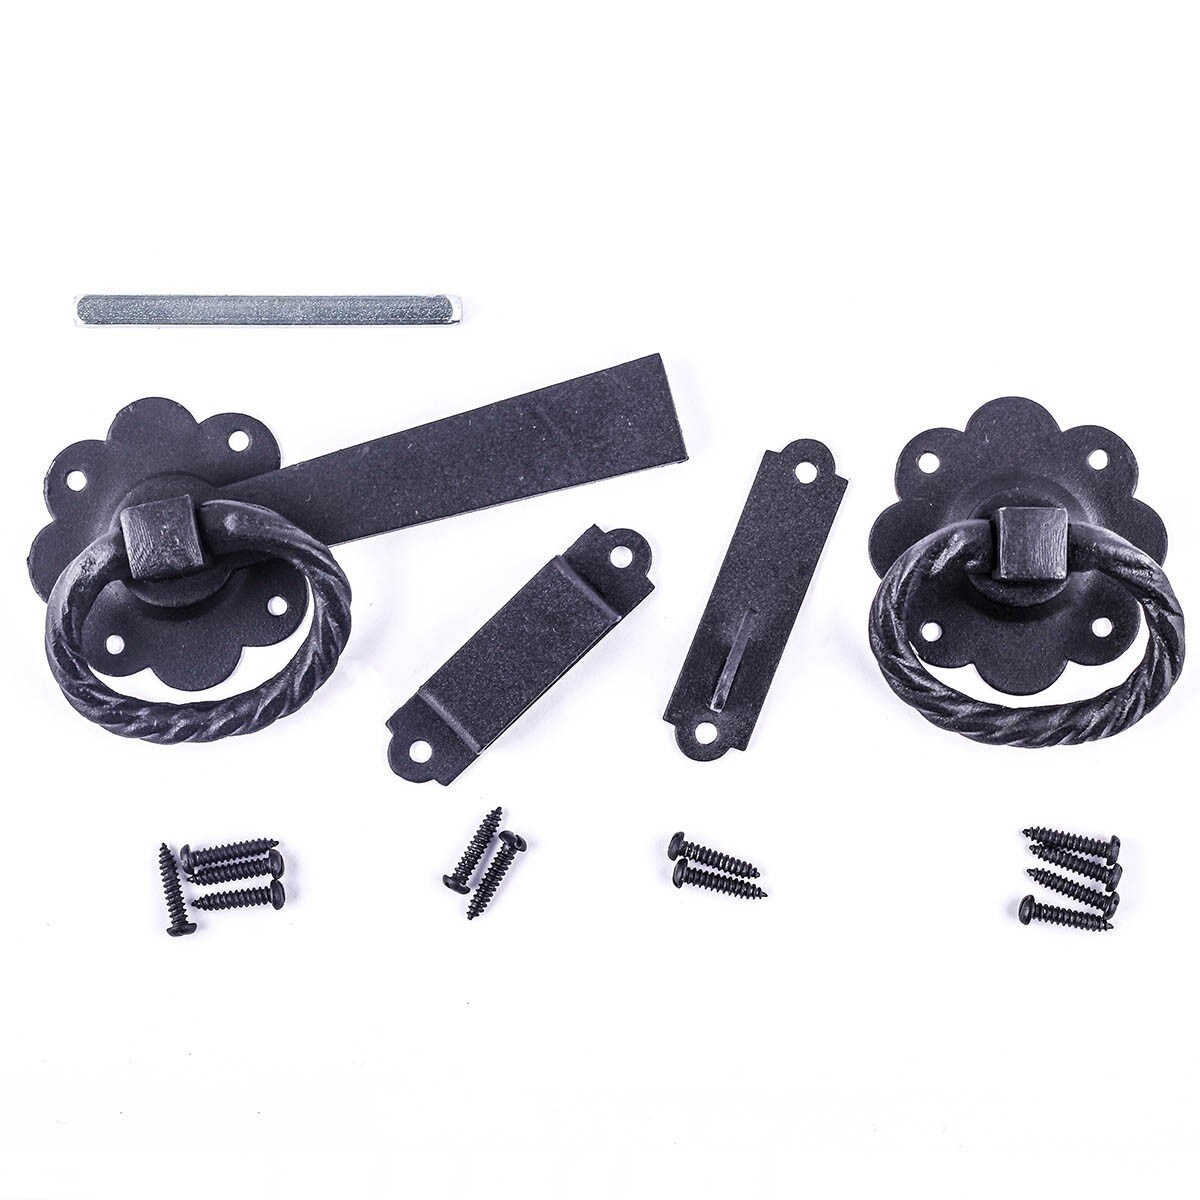 Iron Valley [T-81-511-LH] Cast Iron Gate Ring Turn Drop Bar Latch - Square  Plate - Left Handed - Flat Black Finish -7